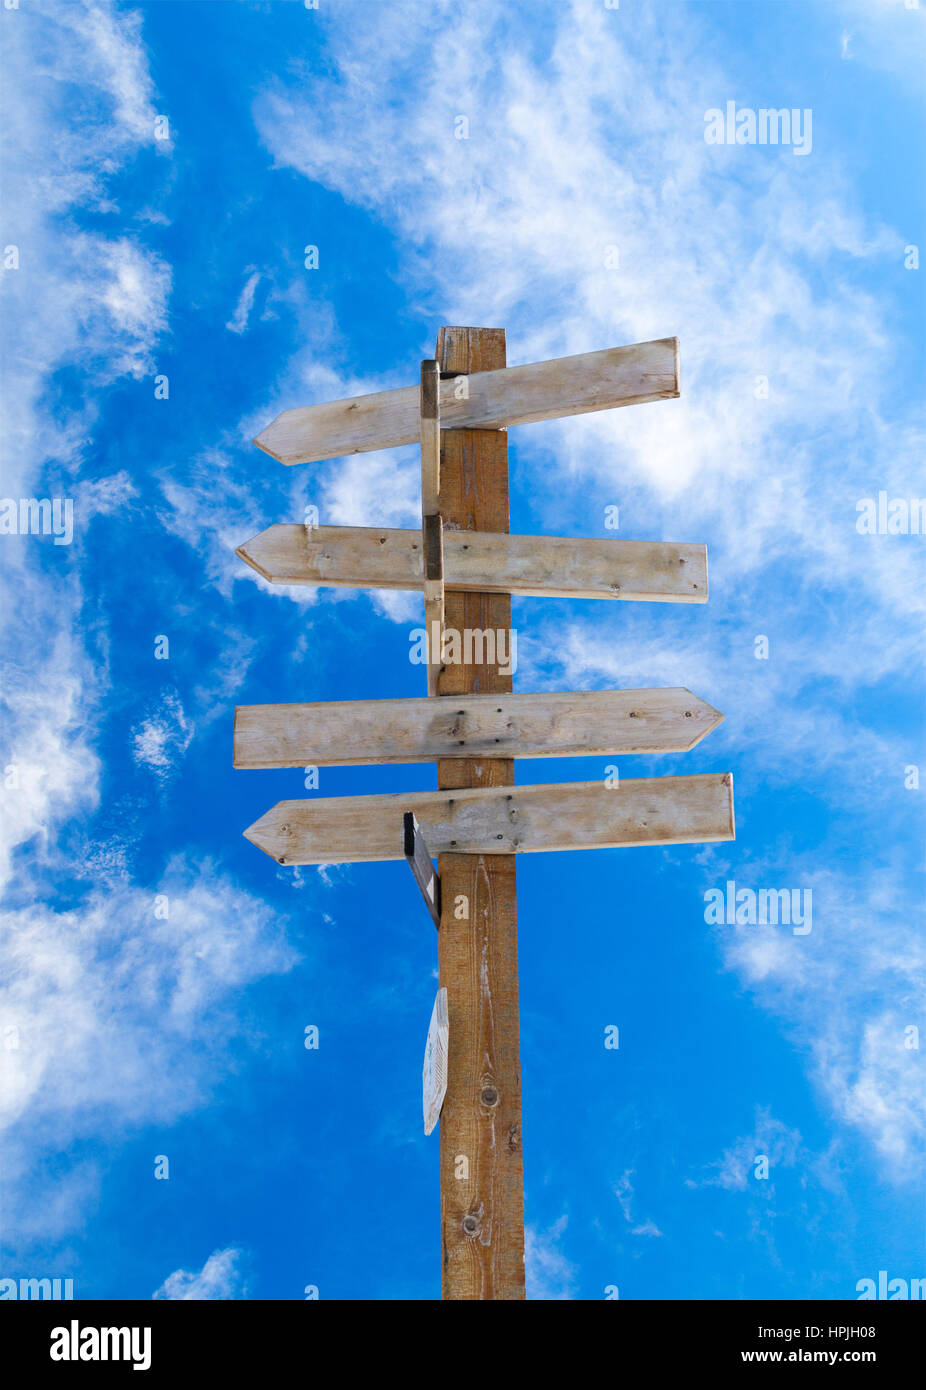 Old wooden arrow signpost against a blue cloudy sky with copy space. Idea of crossroads and concept of being lost, confused or indecisiveness. Vertica Stock Photo